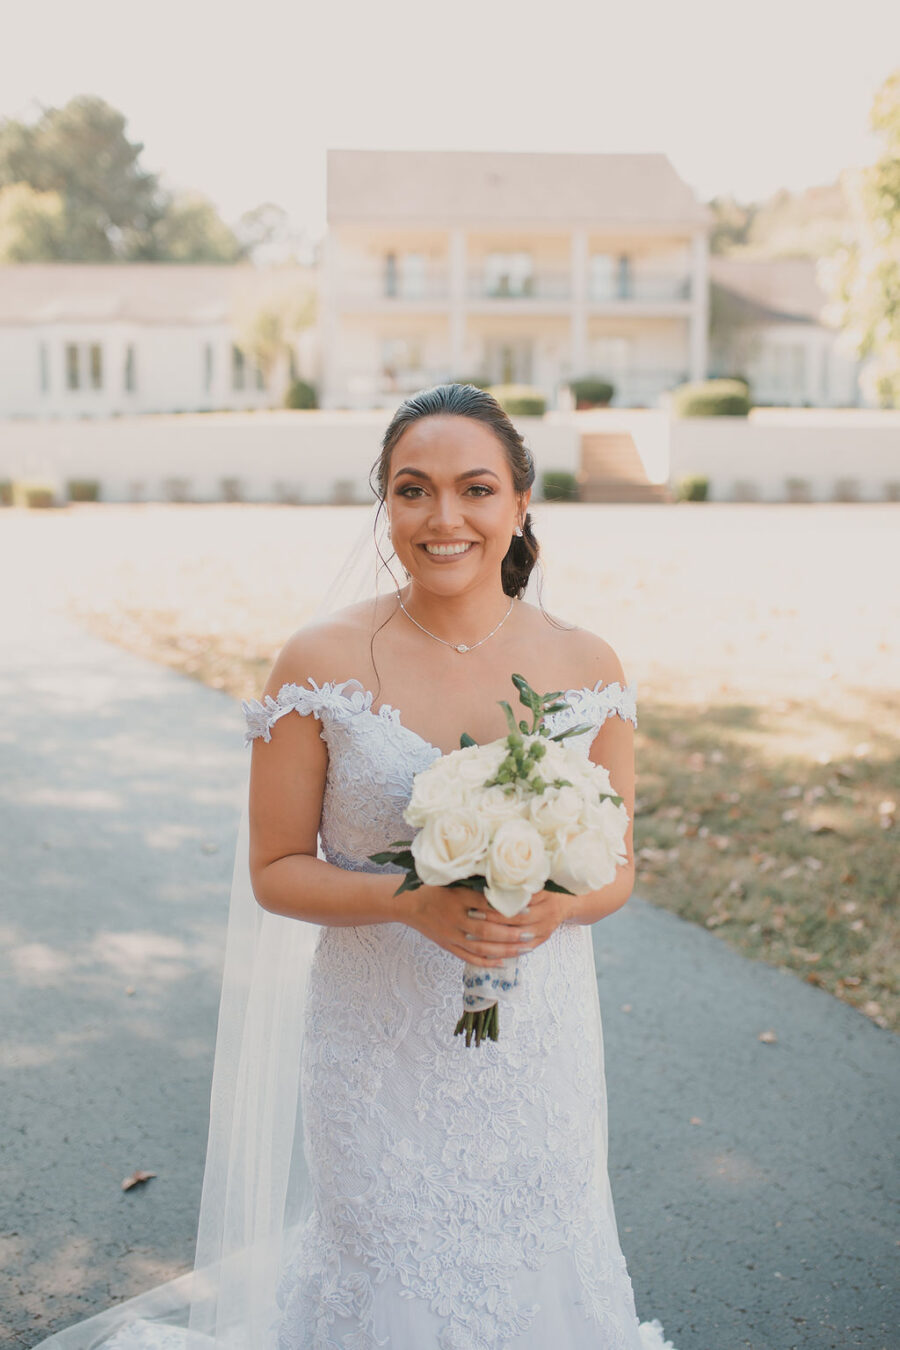 Bridal portrait: Romantic Outdoor Wedding at Reunion Stay